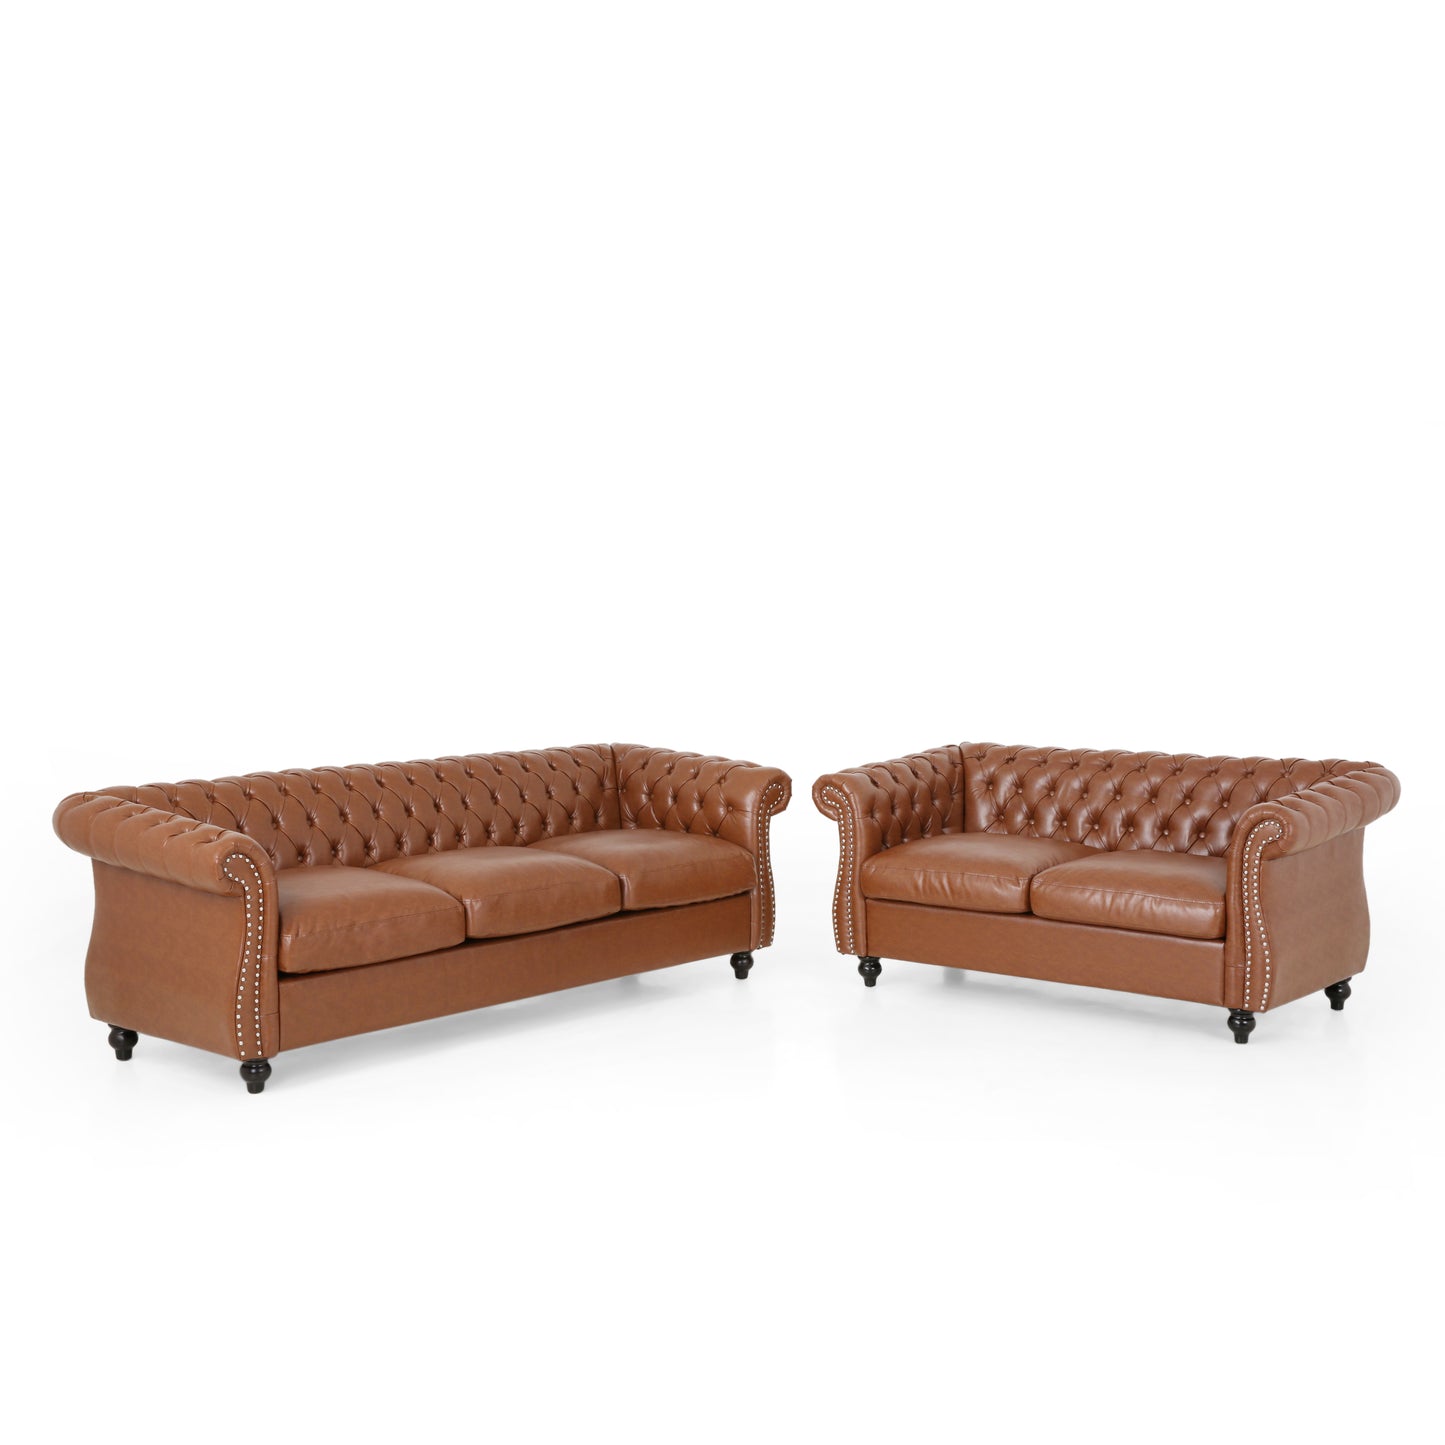 Madelena Traditional Chesterfield 2 Piece Living Room Set